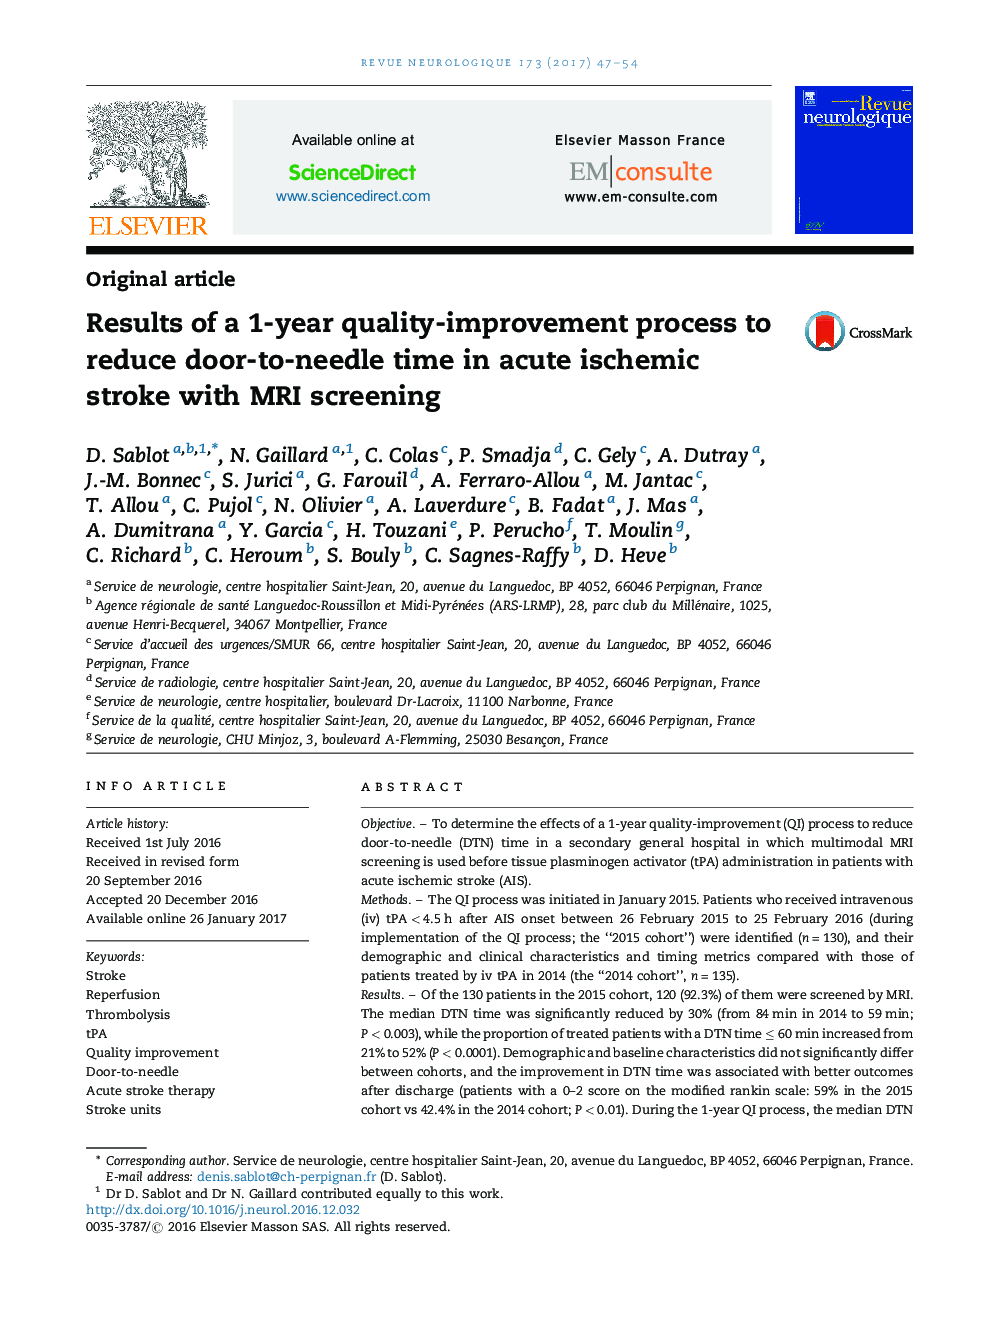 Results of a 1-year quality-improvement process to reduce door-to-needle time in acute ischemic stroke with MRI screening